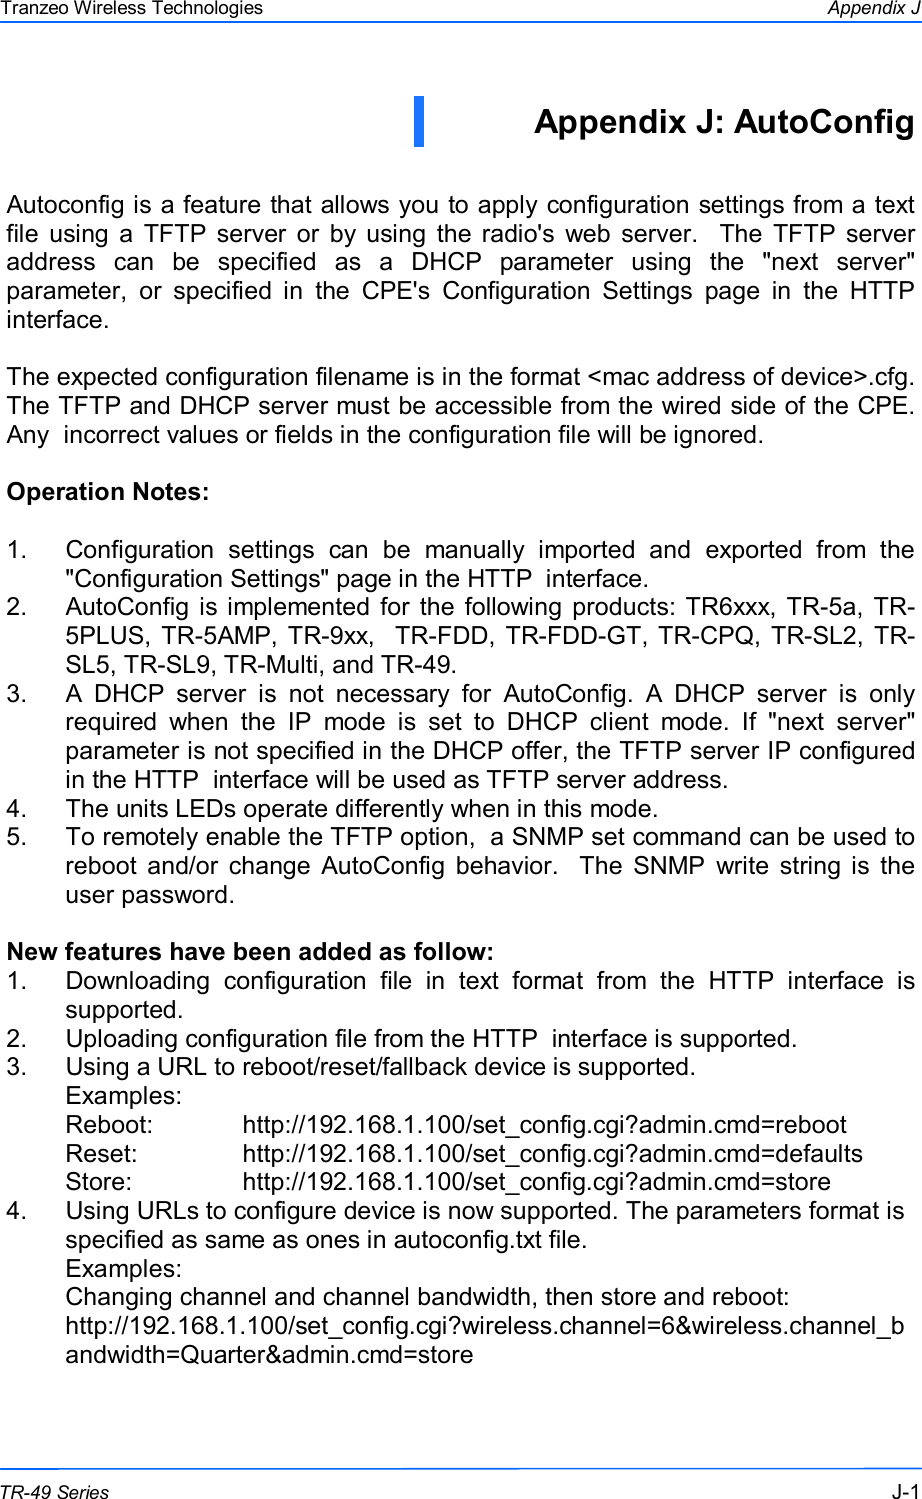  111 This document is intended for Public Distribution                         19473 Fraser Way, Pitt Meadows, B.C. Canada V3Y  2V4 Appendix J J-1 TR-49 Series Tranzeo Wireless Technologies Appendix J: AutoConfig   Autoconfig is a feature that allows you to apply configuration settings from a text file  using  a  TFTP  server  or  by using  the radio&apos;s  web  server.    The  TFTP  server address  can  be  specified  as  a  DHCP  parameter  using  the  &quot;next  server&quot; parameter,  or  specified  in  the  CPE&apos;s  Configuration  Settings  page  in  the  HTTP  interface.   The expected configuration filename is in the format &lt;mac address of device&gt;.cfg. The TFTP and DHCP server must be accessible from the wired side of the CPE.  Any  incorrect values or fields in the configuration file will be ignored.  Operation Notes:  1.  Configuration  settings  can  be  manually  imported  and  exported  from  the &quot;Configuration Settings&quot; page in the HTTP  interface. 2.  AutoConfig  is implemented  for  the following  products: TR6xxx,  TR-5a,  TR-5PLUS, TR-5AMP, TR-9xx,   TR-FDD, TR-FDD-GT, TR-CPQ,  TR-SL2, TR-SL5, TR-SL9, TR-Multi, and TR-49. 3.  A  DHCP  server  is  not  necessary  for  AutoConfig.  A  DHCP  server  is  only required  when  the  IP  mode  is  set  to  DHCP  client  mode.  If  &quot;next  server&quot; parameter is not specified in the DHCP offer, the TFTP server IP configured in the HTTP  interface will be used as TFTP server address. 4.  The units LEDs operate differently when in this mode.  5.  To remotely enable the TFTP option,  a SNMP set command can be used to reboot  and/or  change  AutoConfig  behavior.   The  SNMP  write  string  is  the user password.  New features have been added as follow: 1.  Downloading  configuration  file  in  text  format  from  the  HTTP  interface  is supported. 2.  Uploading configuration file from the HTTP  interface is supported. 3.  Using a URL to reboot/reset/fallback device is supported.  Examples: Reboot:            http://192.168.1.100/set_config.cgi?admin.cmd=reboot Reset:              http://192.168.1.100/set_config.cgi?admin.cmd=defaults Store:      http://192.168.1.100/set_config.cgi?admin.cmd=store 4.  Using URLs to configure device is now supported. The parameters format is specified as same as ones in autoconfig.txt file. Examples: Changing channel and channel bandwidth, then store and reboot: http://192.168.1.100/set_config.cgi?wireless.channel=6&amp;wireless.channel_bandwidth=Quarter&amp;admin.cmd=store  